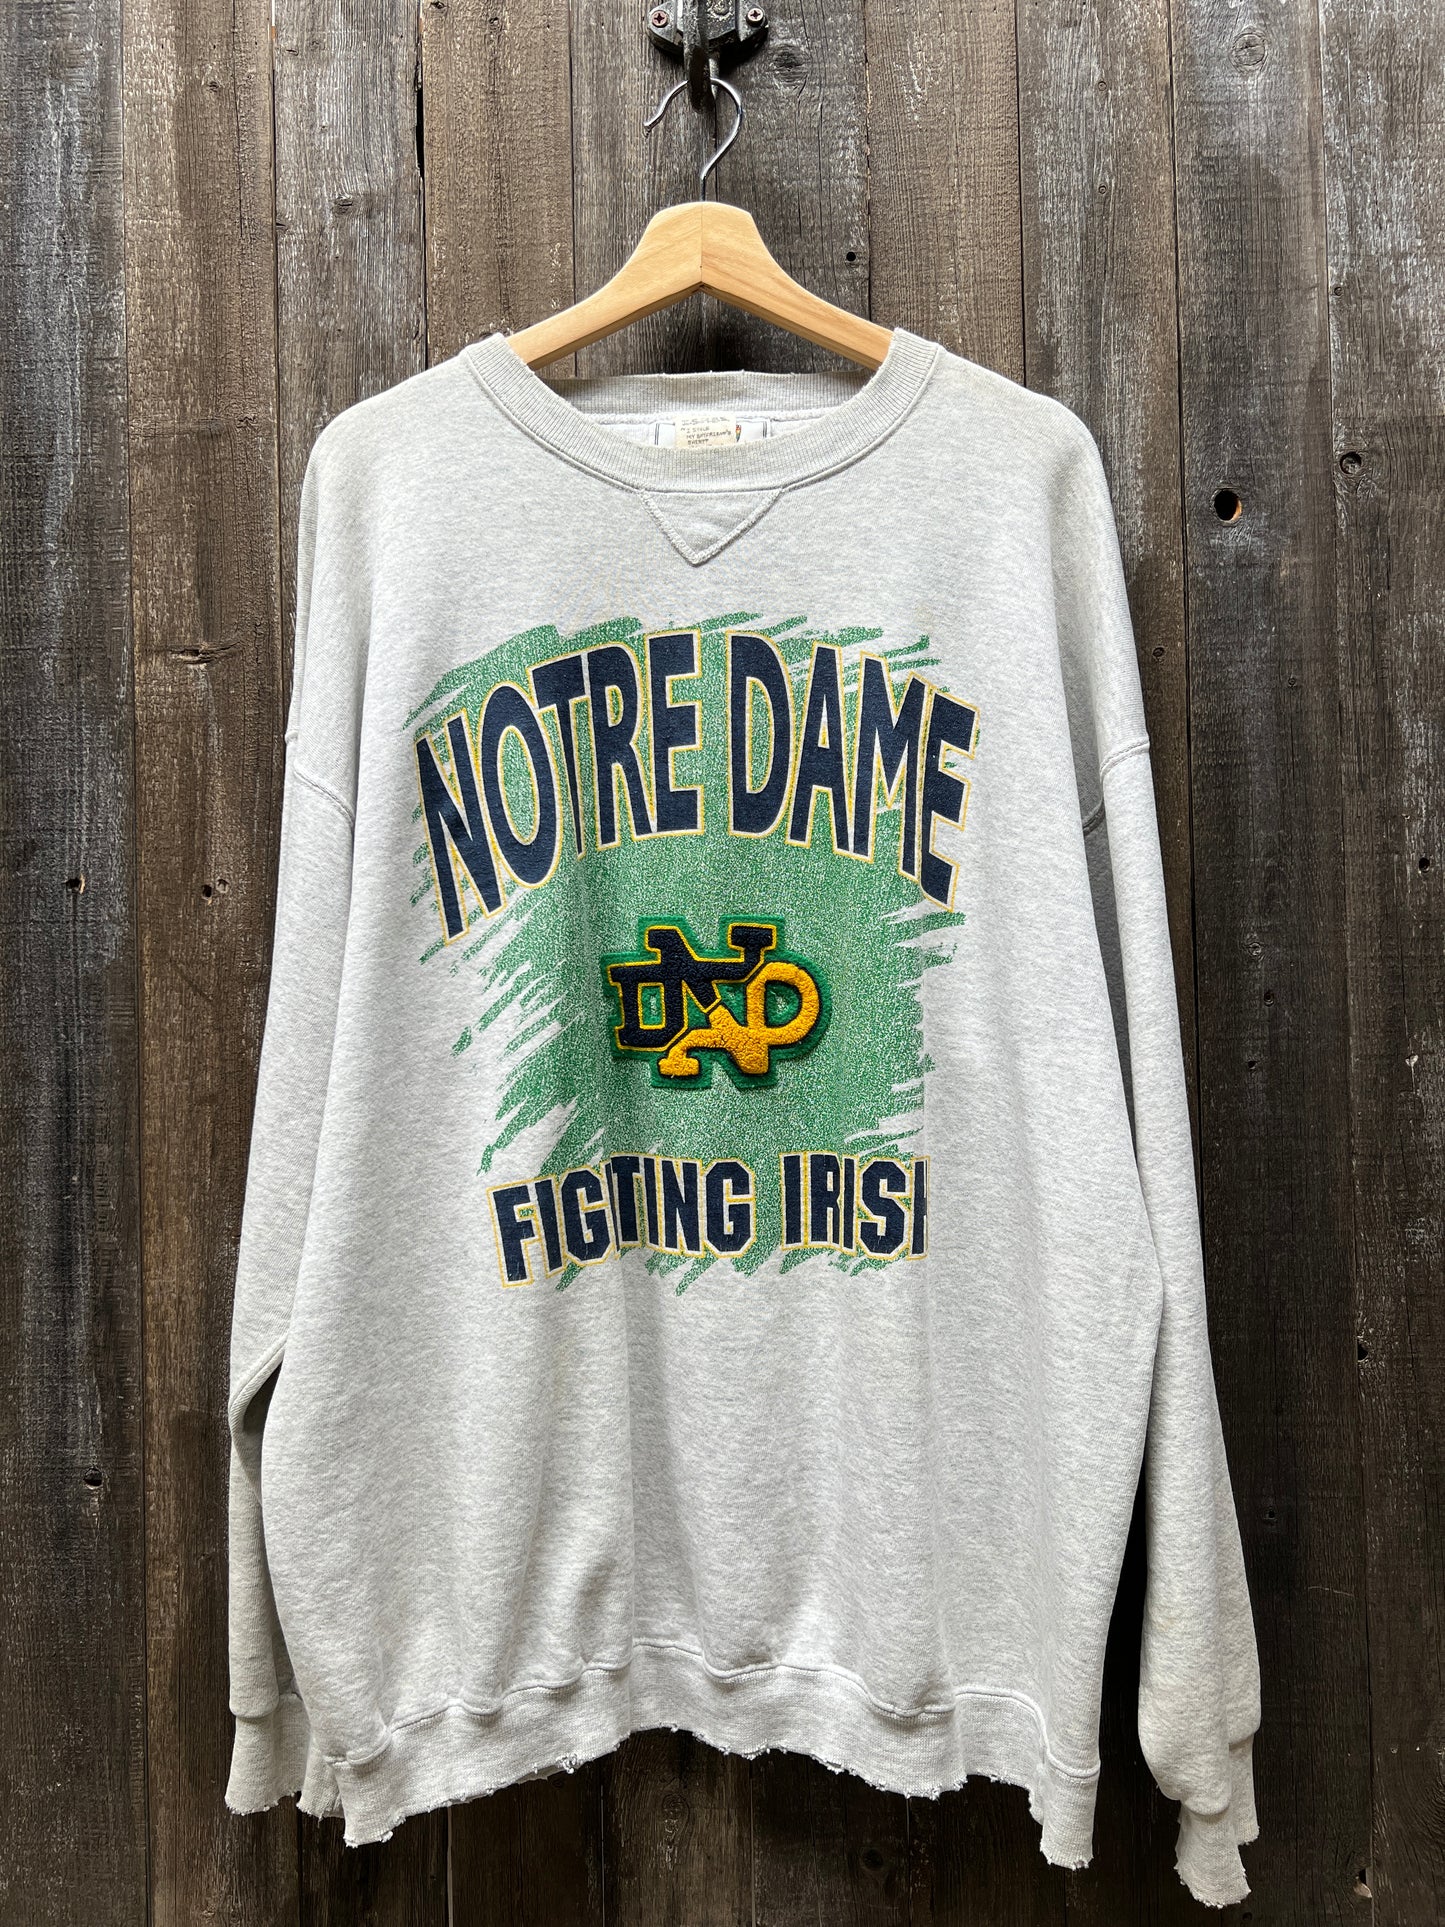 Notre Dame Sweatshirt -XL-Customize Your Embroidery Wording